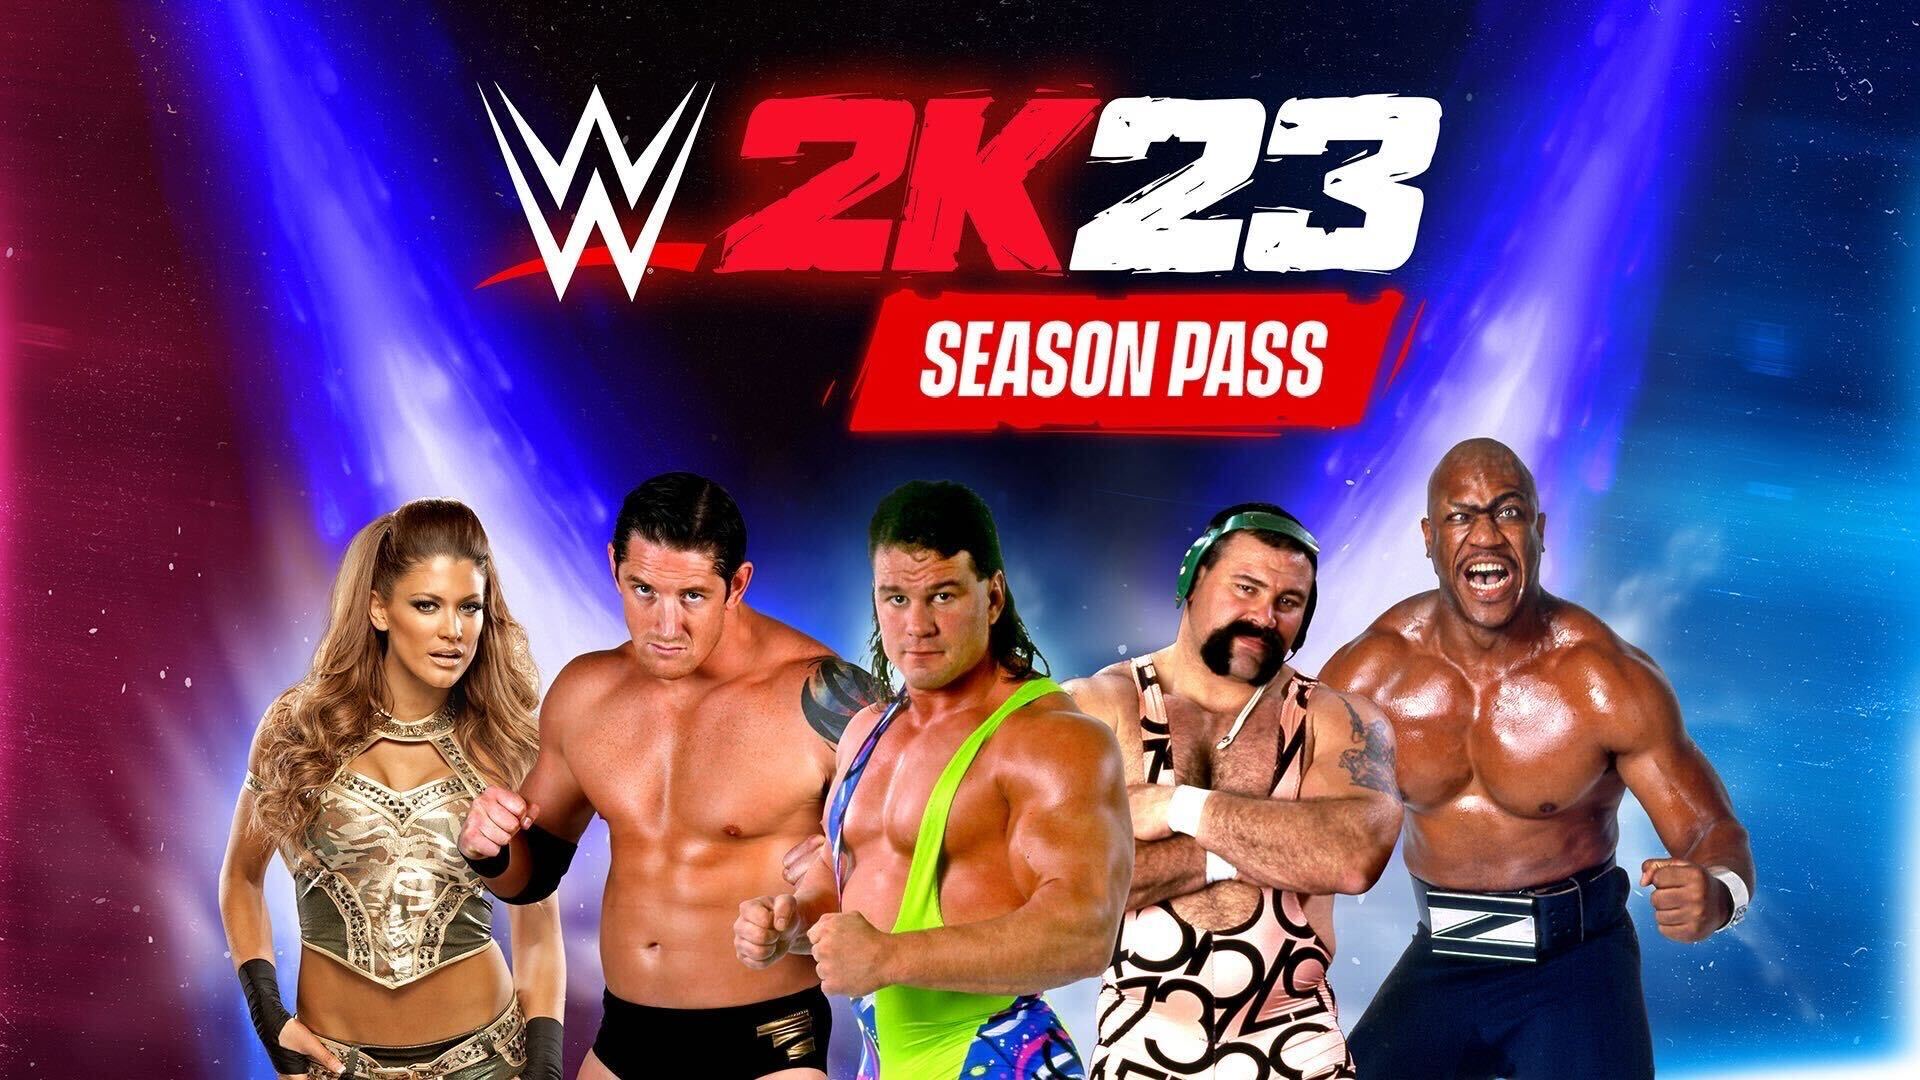 WWE 2K23 Will Feature 24 Playable Superstars And Legends In Post-Launch Content Roadmap